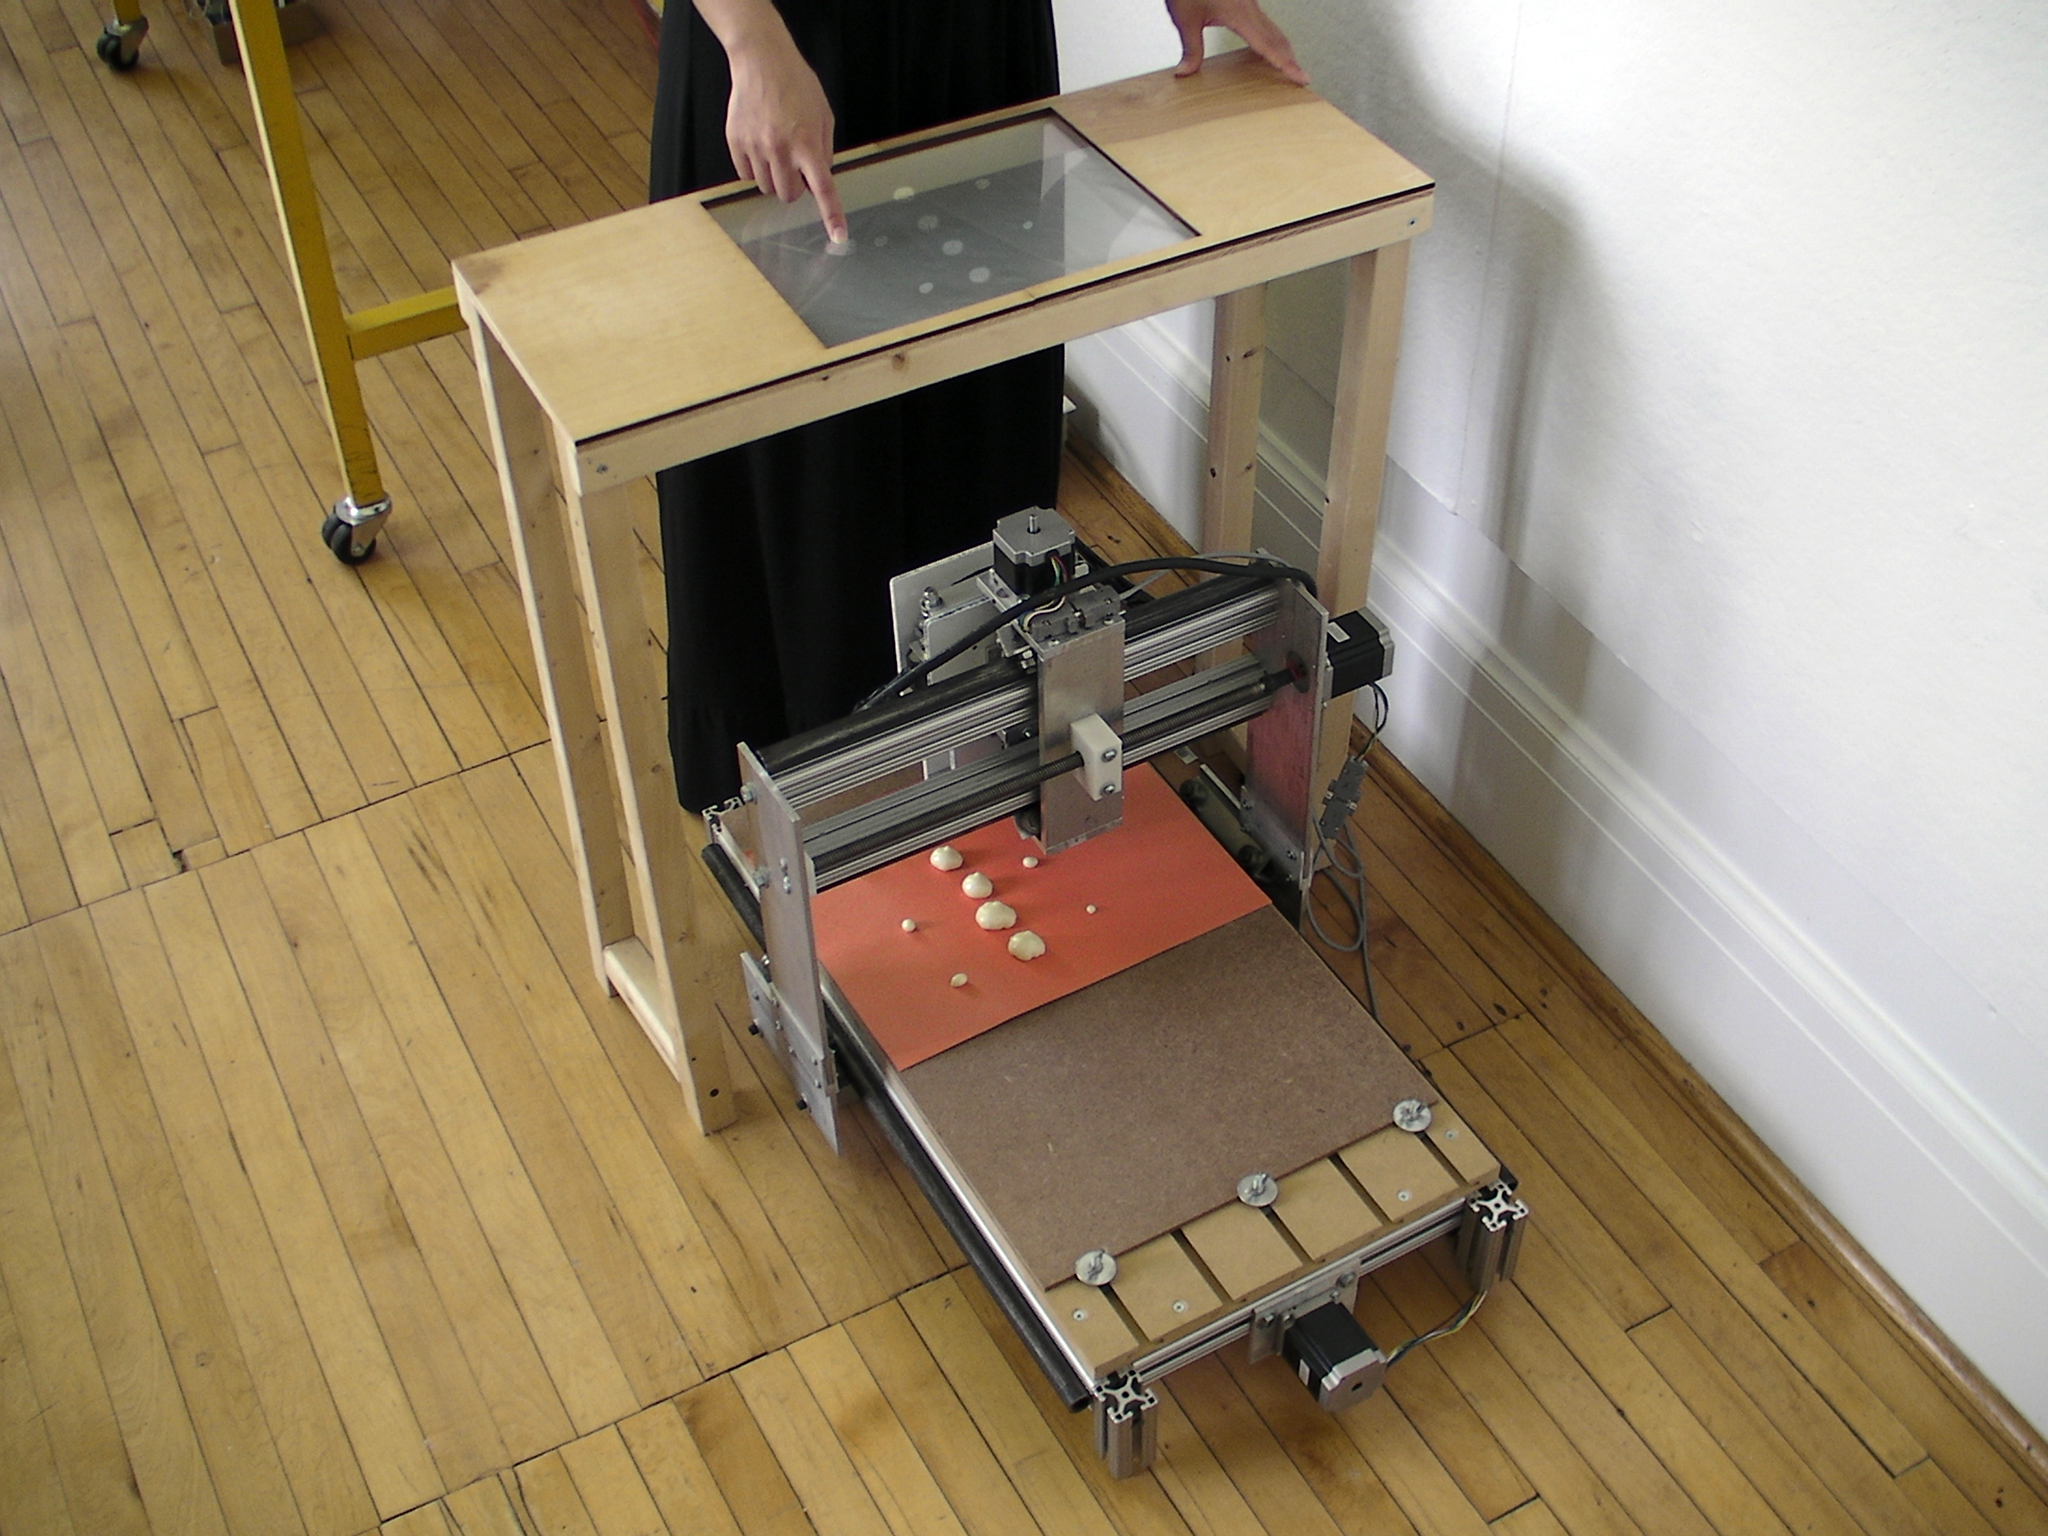 Shaper is a prototype device for interactive fabrication using expanding polyurethane foam